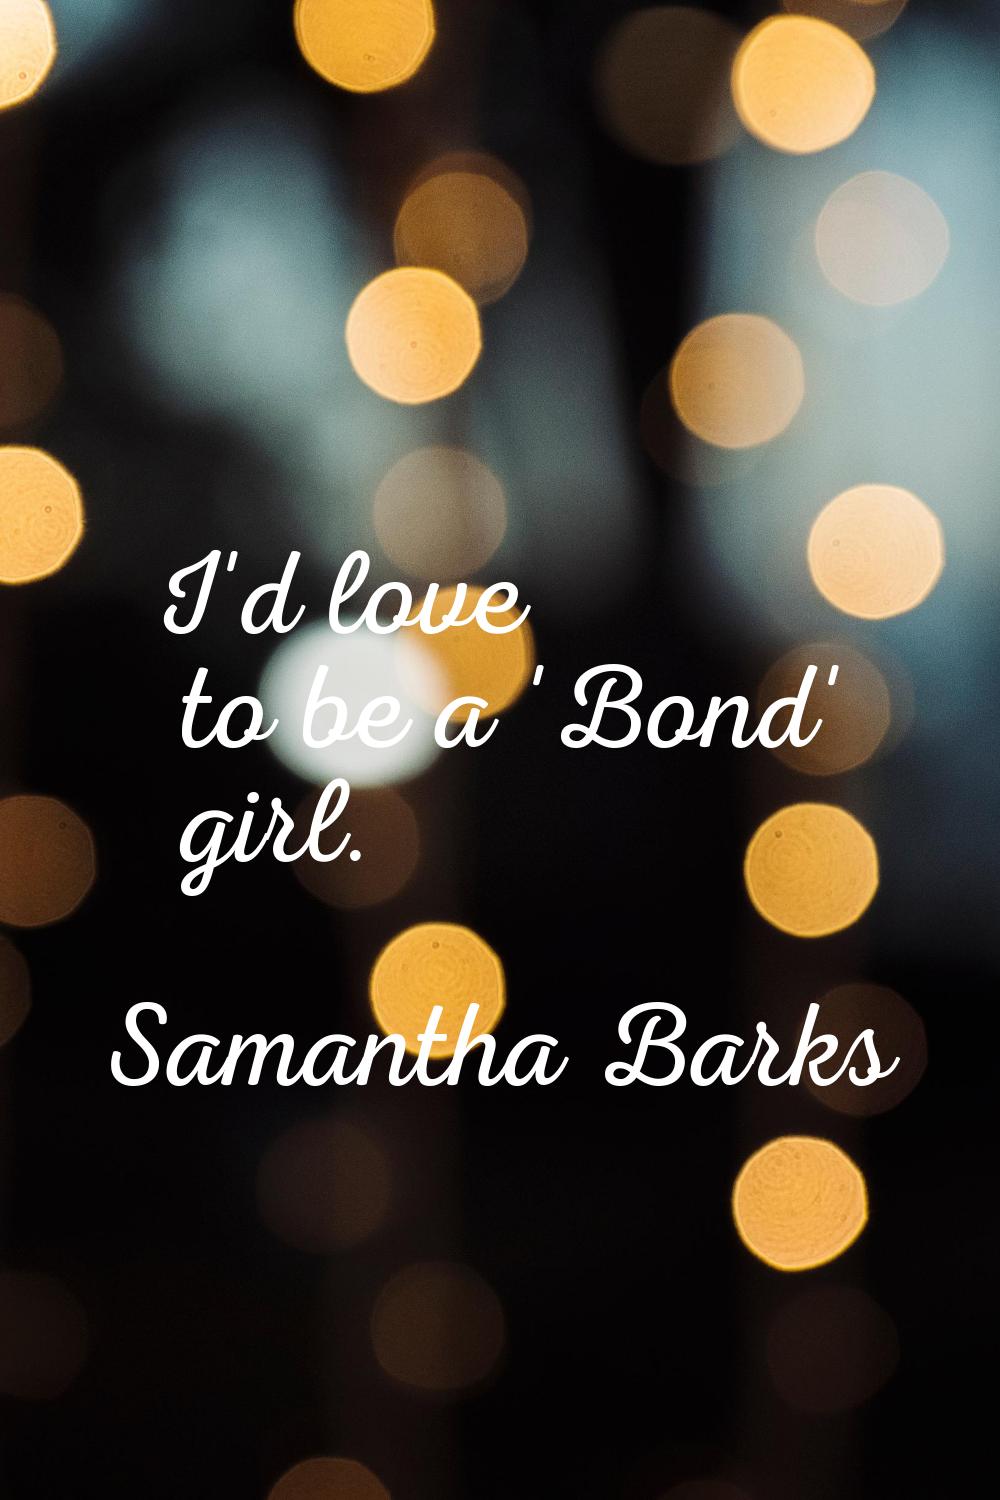 I'd love to be a 'Bond' girl.